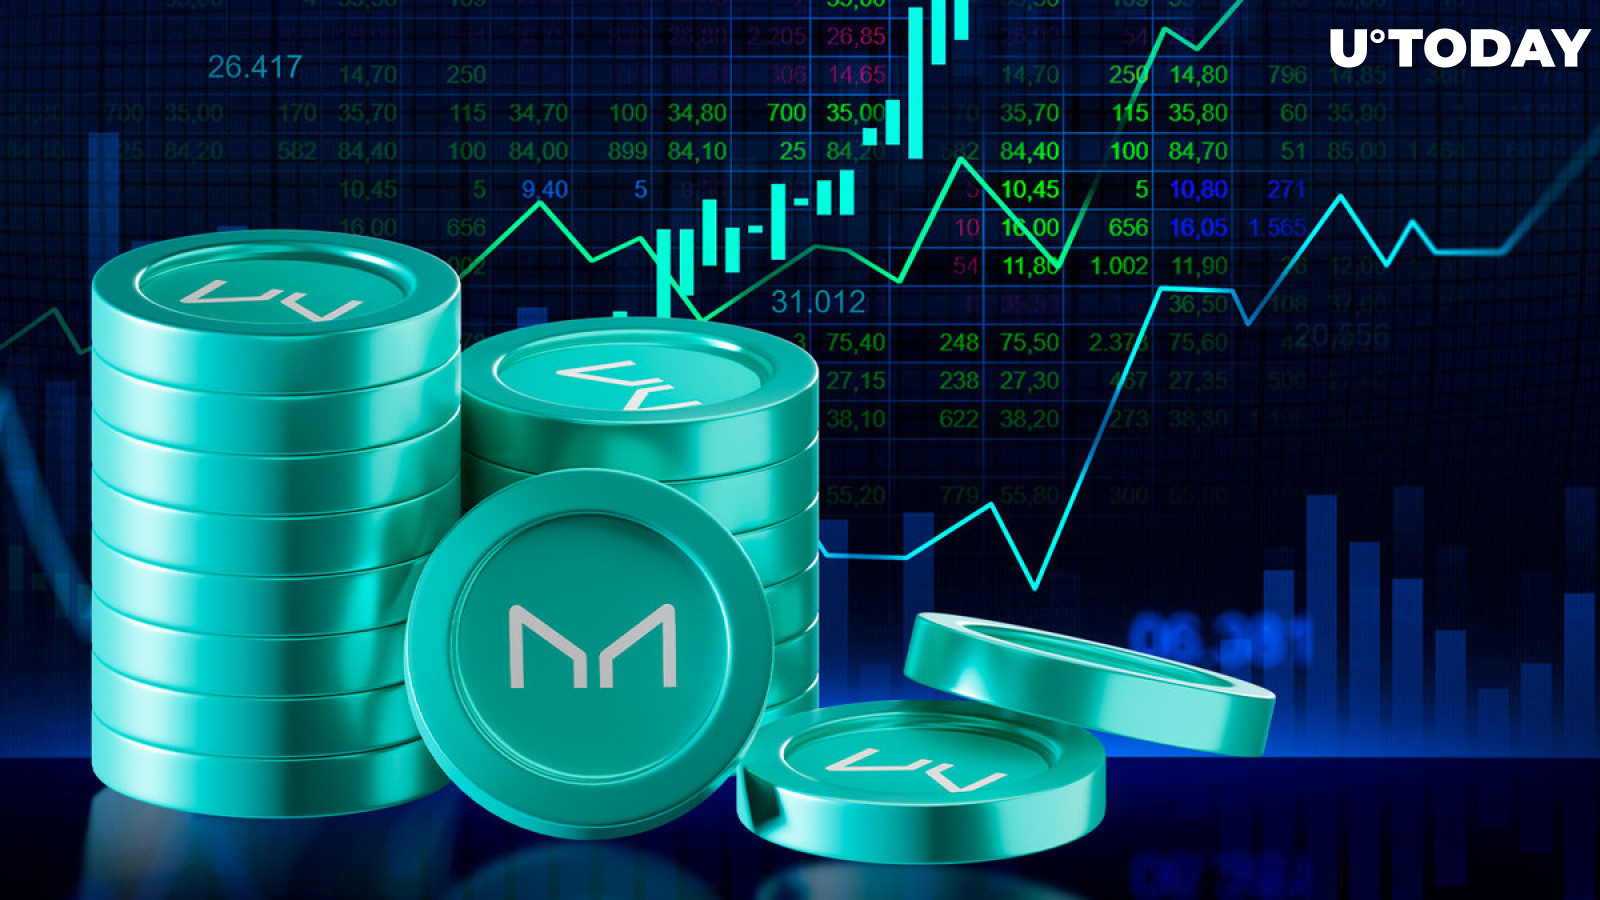 Maker (MKR) Addresses Hit 10-Week High, Here's How Price Reacts